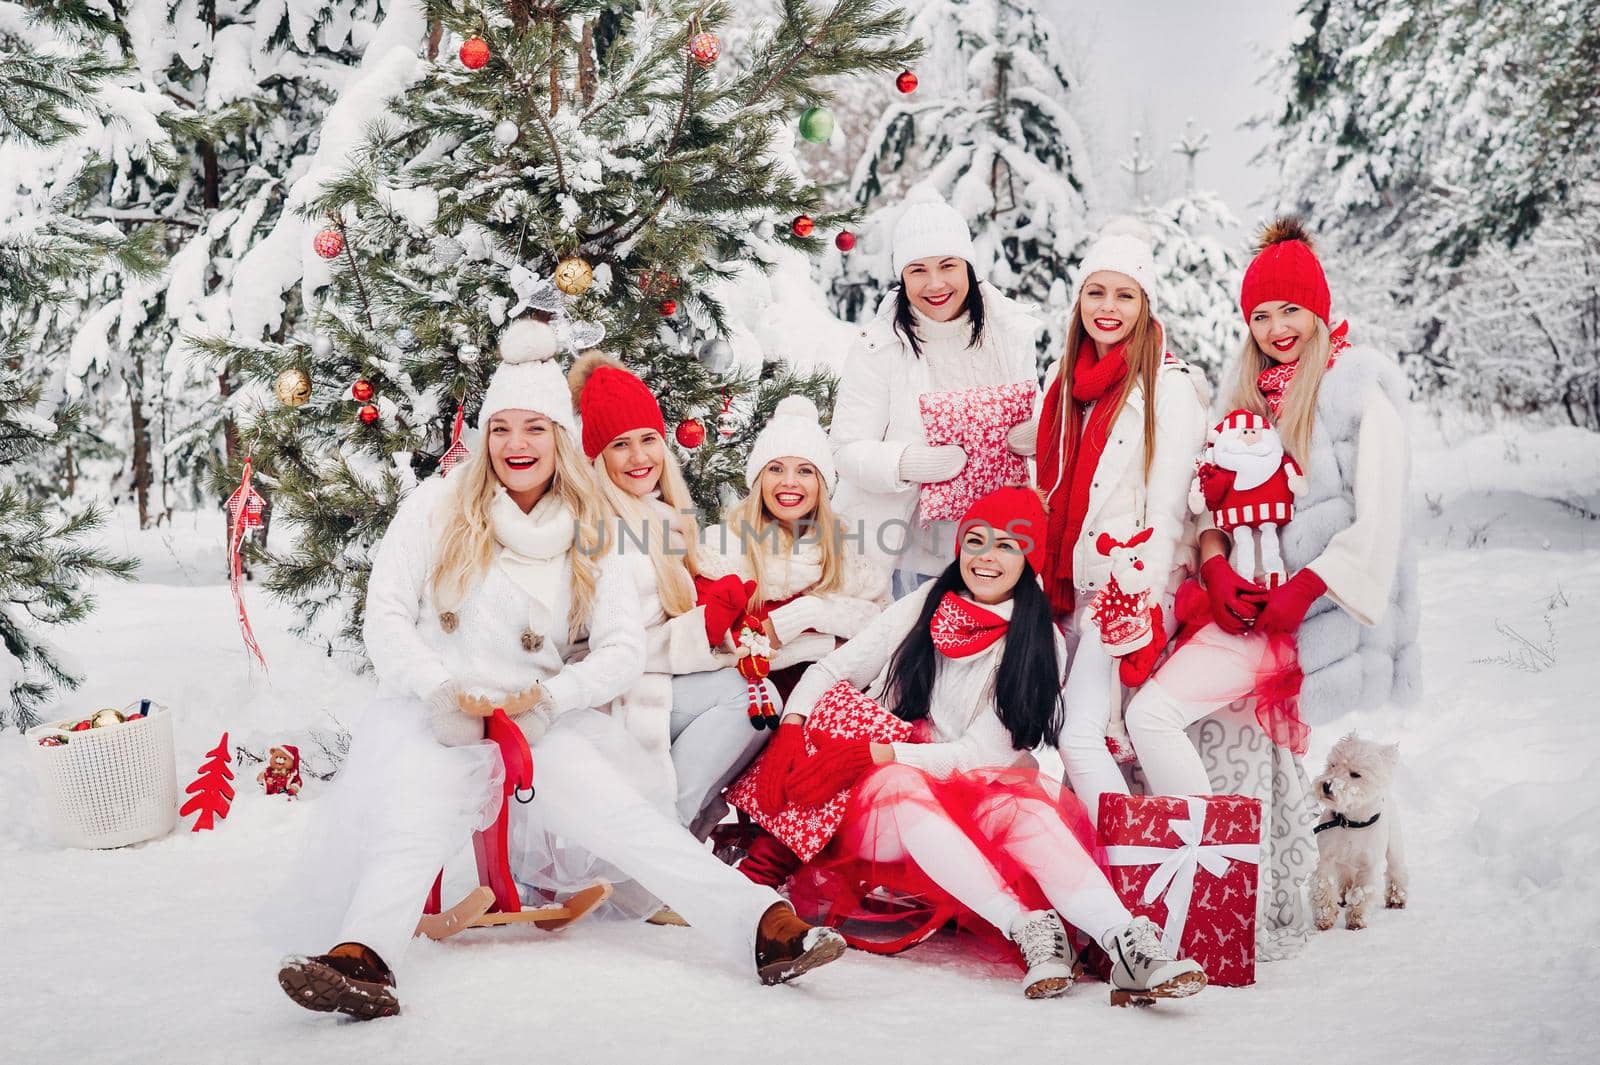 A large group of girls with Christmas gifts in their hands standing in the winter forest.Girls in red and white clothes with Christmas gifts in the snowy forest